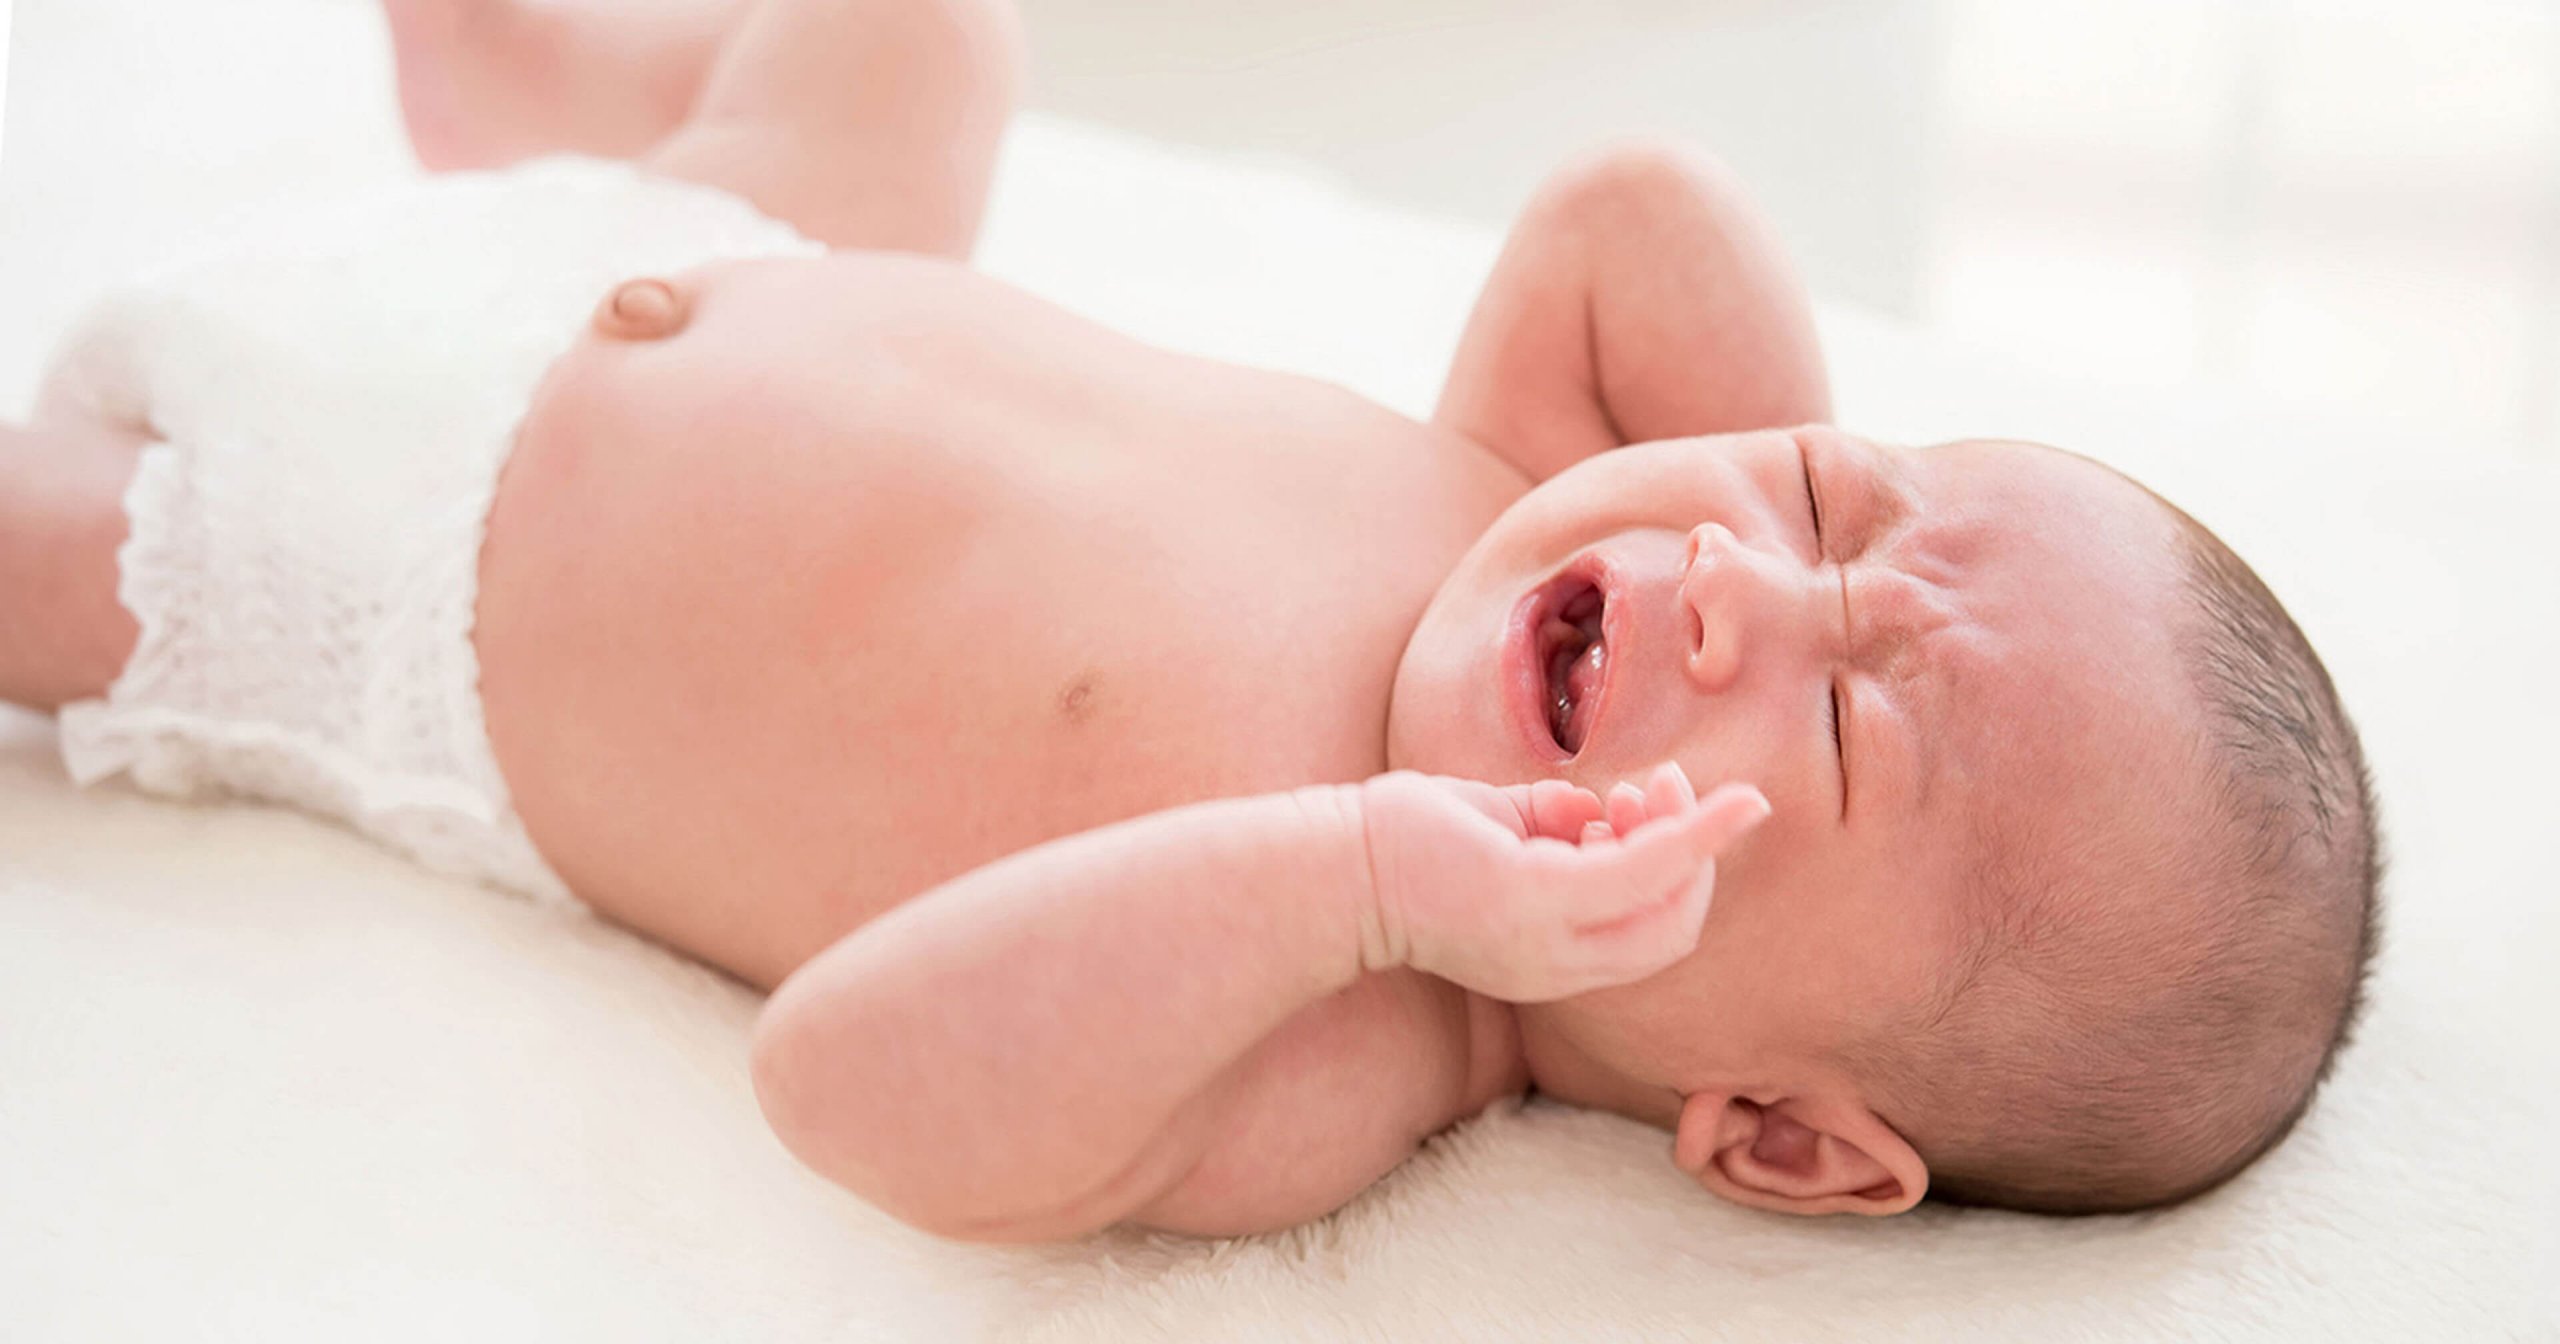 What's a mama to do when baby hasn't pooped in a while? Here, we’ll talk about what causes baby constipation, offer some safe, natural ways to give your little one relief, and explain when it might be time to call the doctor.